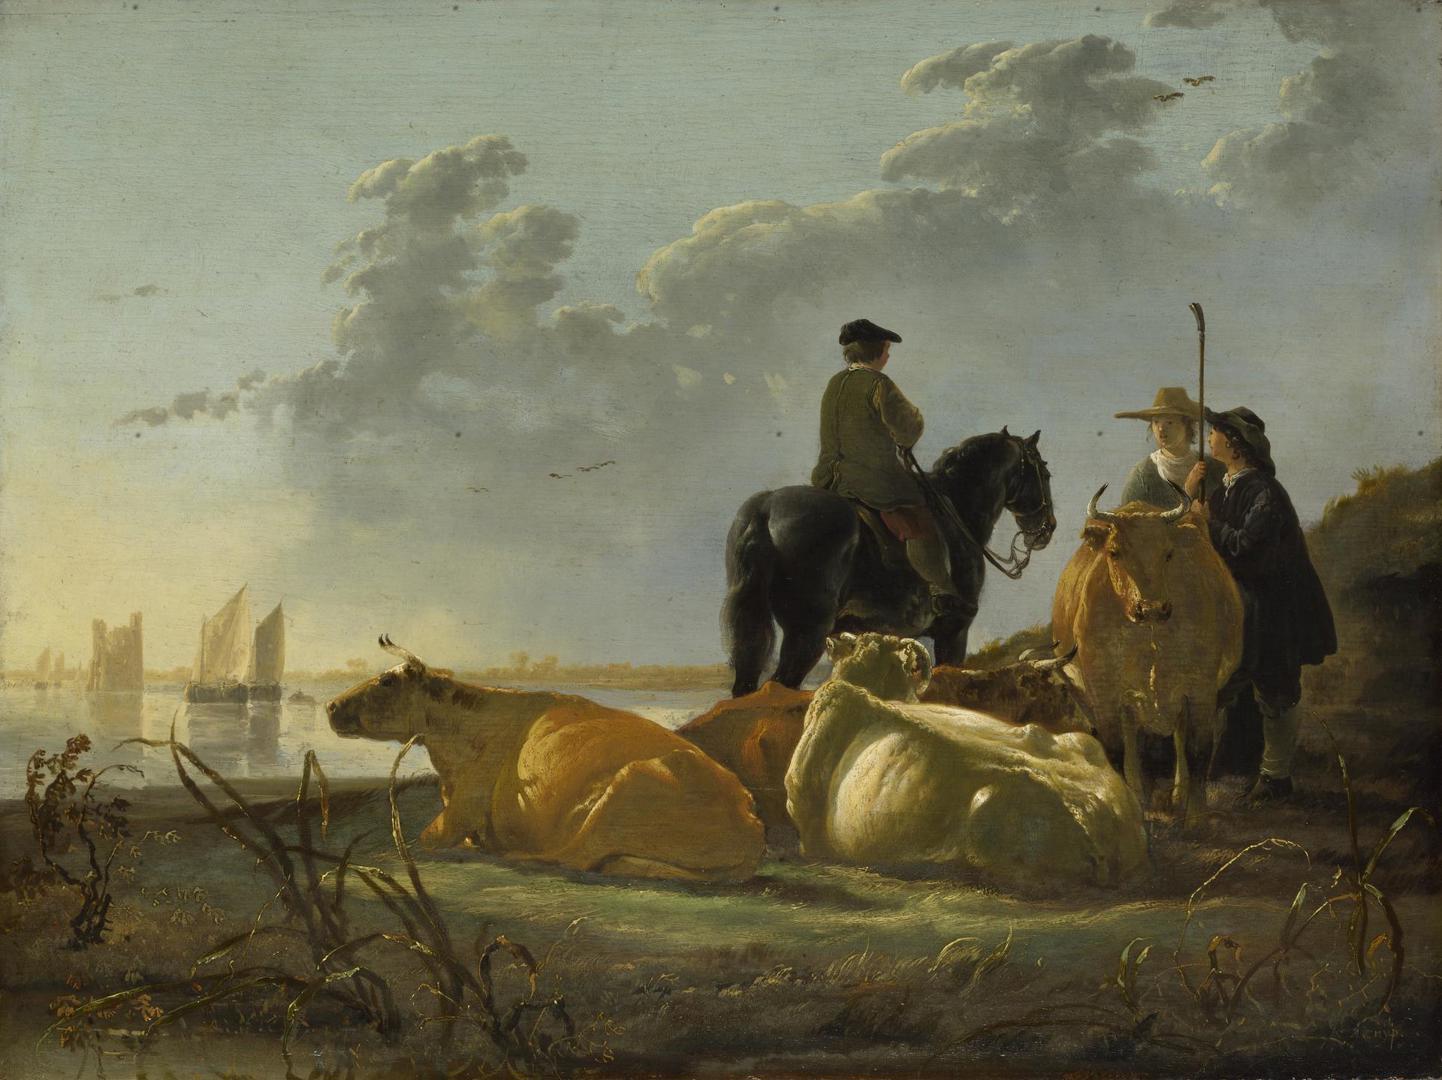 Peasants and Cattle by the River Merwede by Aelbert Cuyp